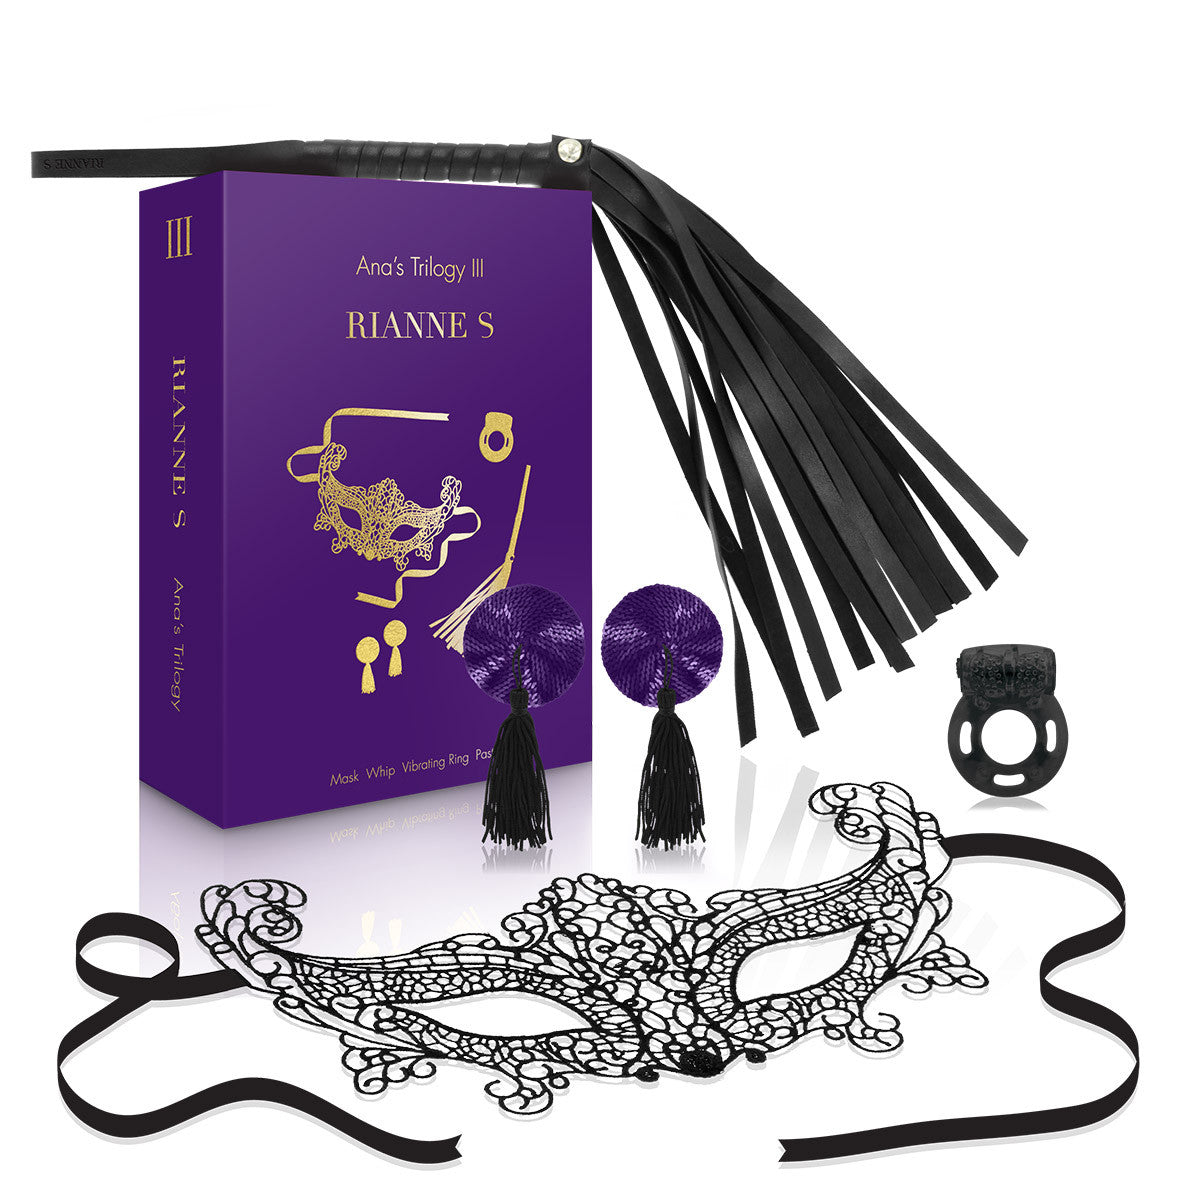 Ana's Trilogy Kit 3 by Rianne S Mask, penis ring, whip & purple sequin pasties